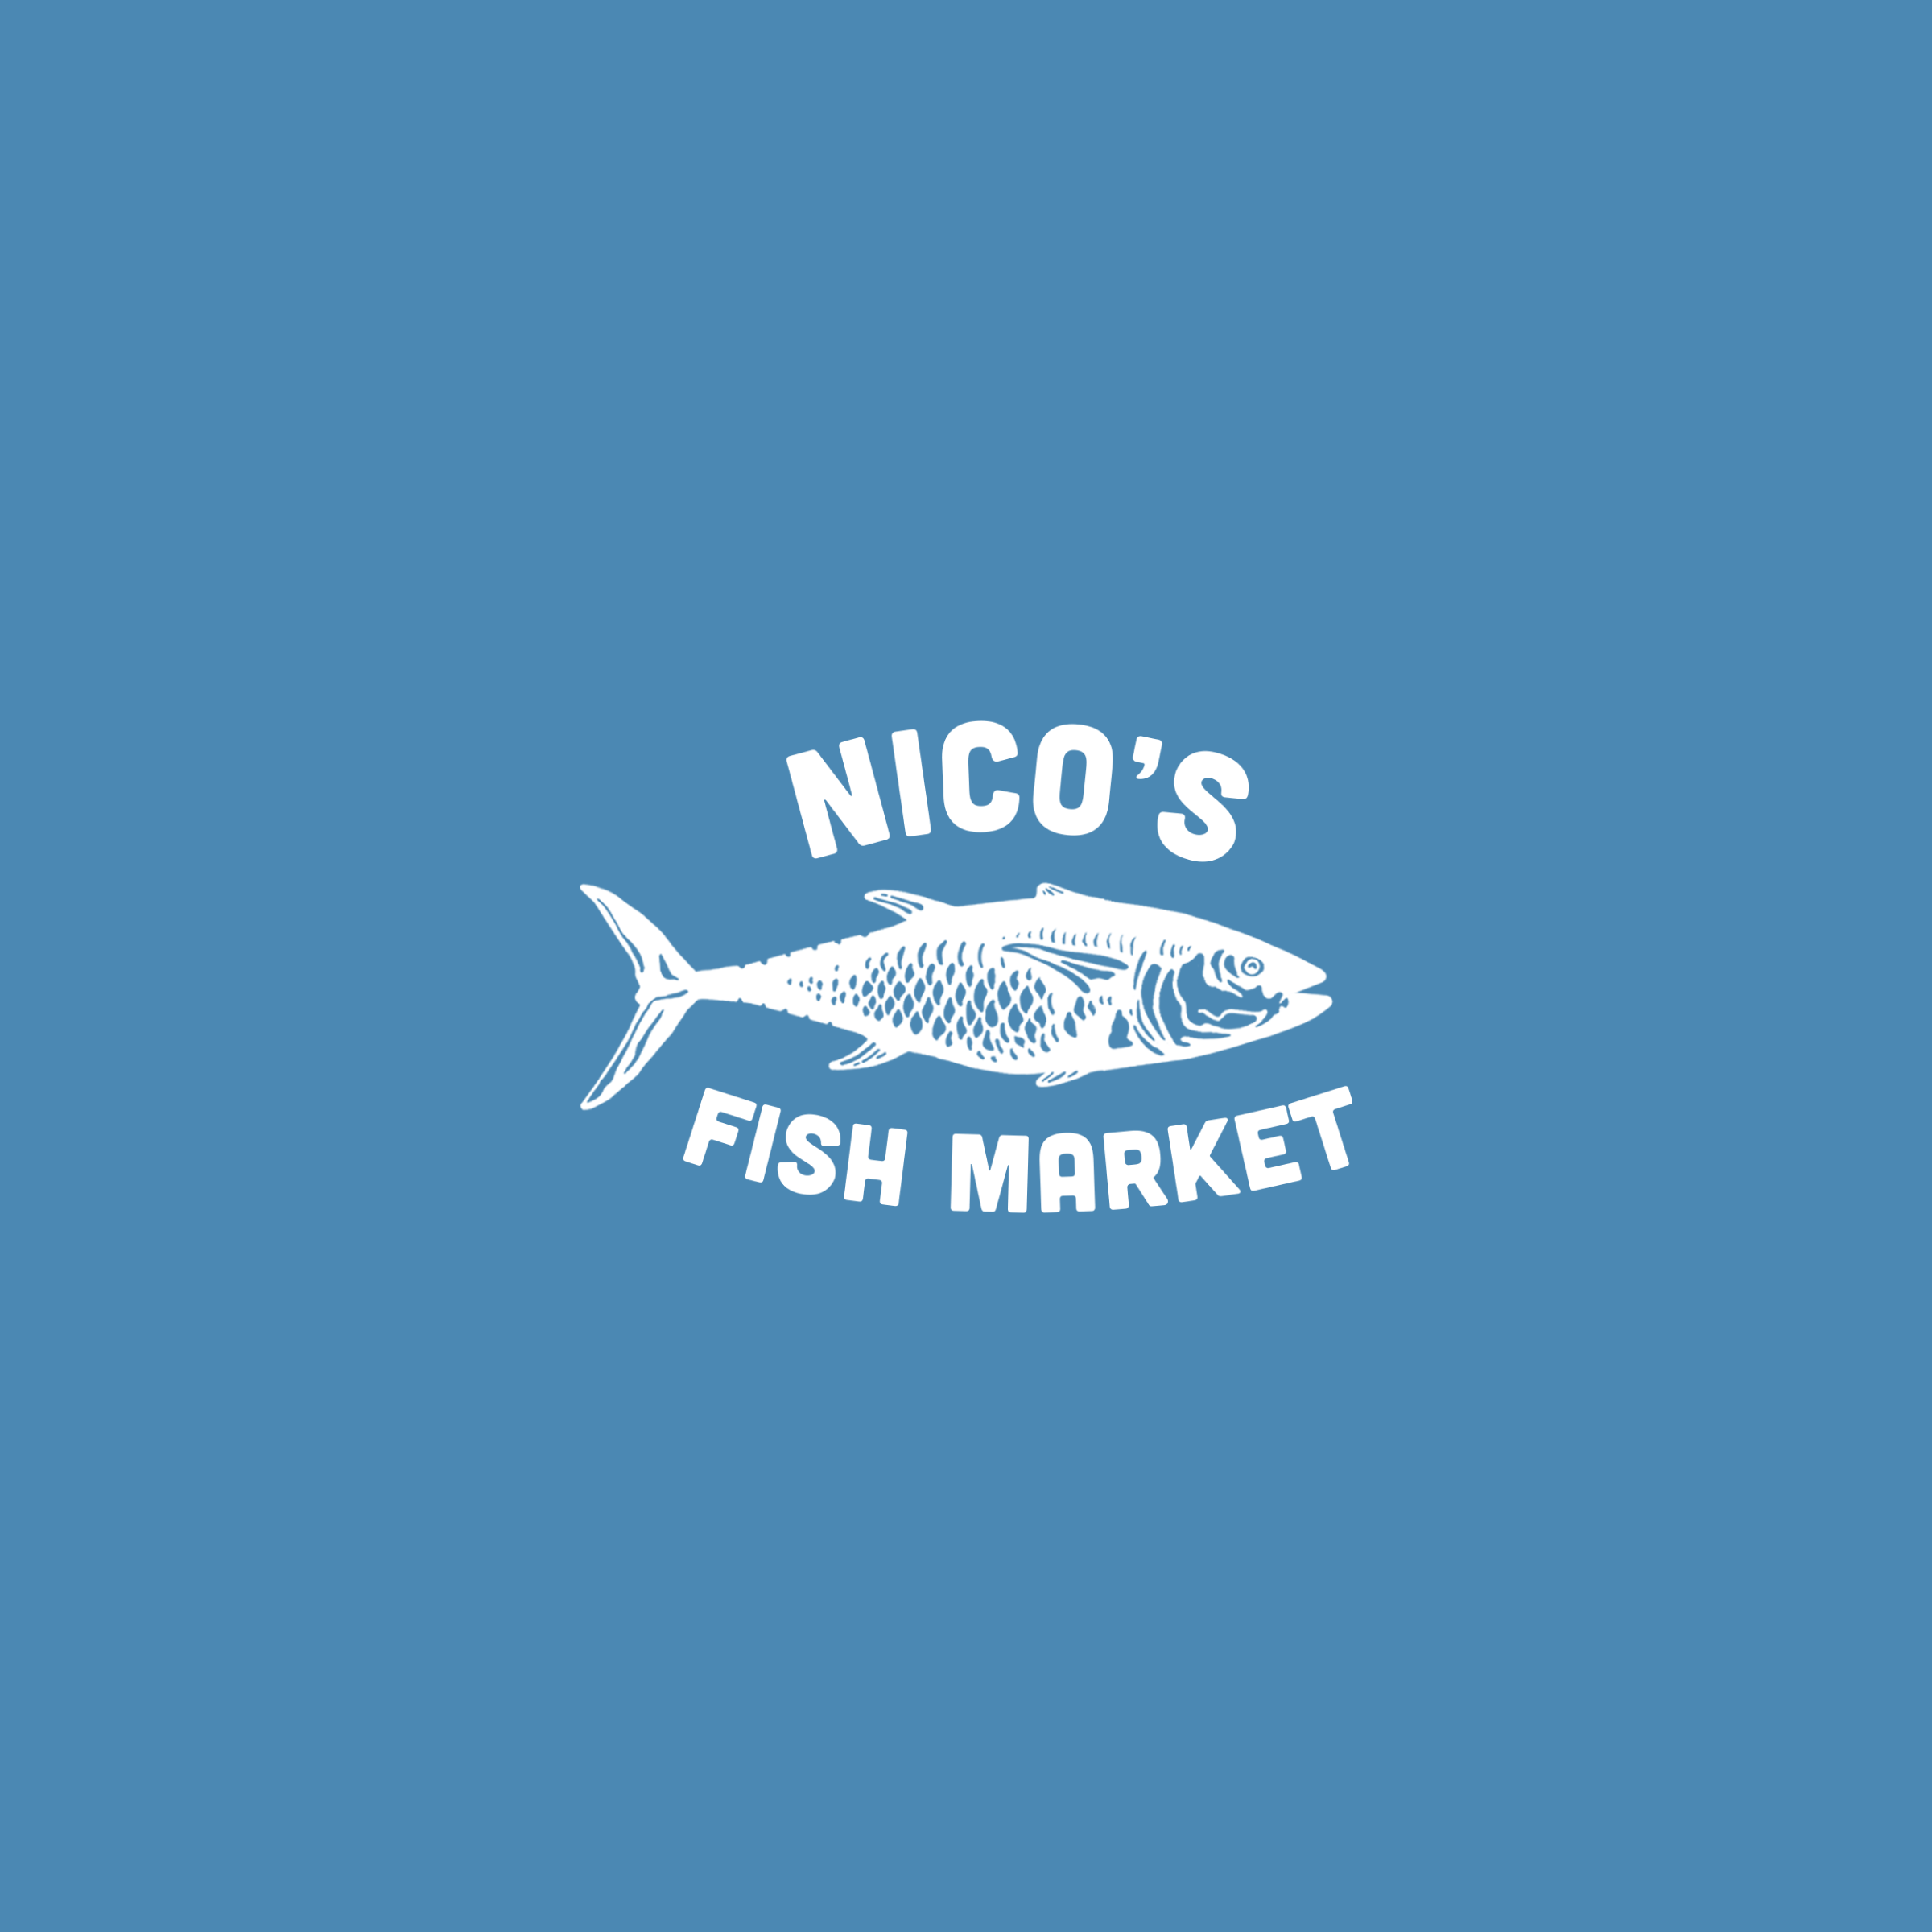 Nico's Fish Market (A pop-up experience at Al's Cafe)